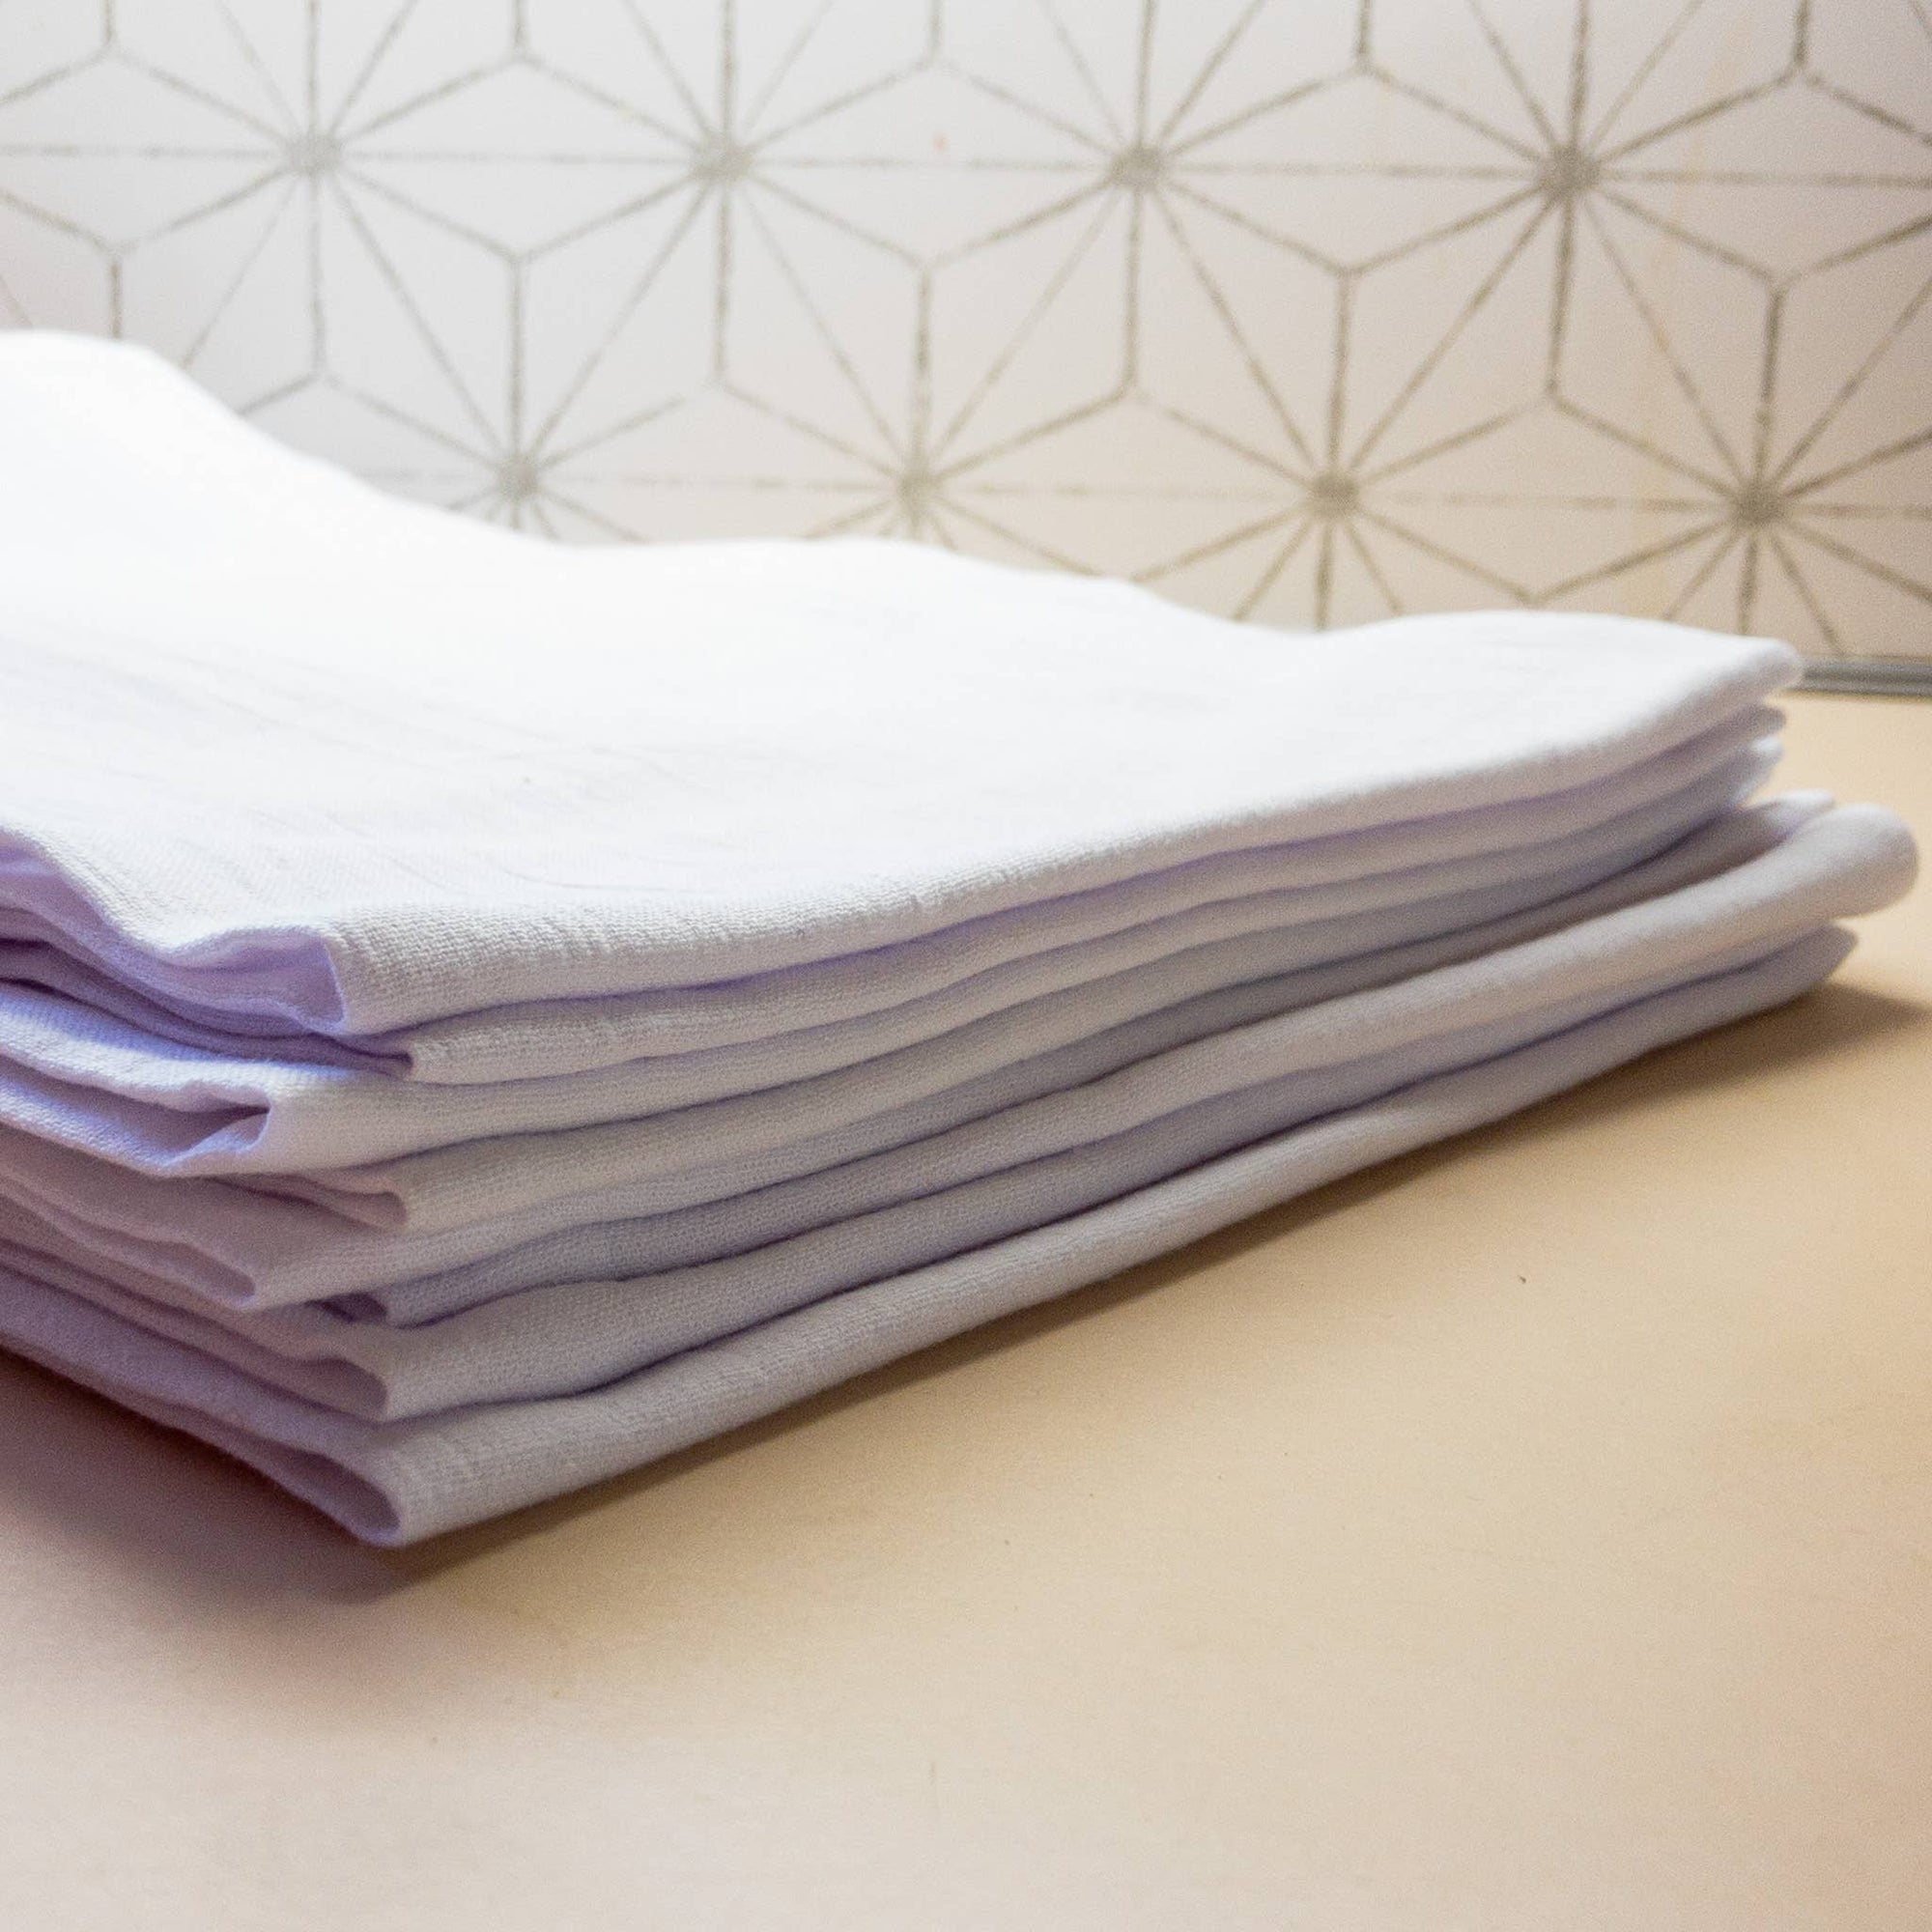 A stack of I Workout Tea Towels on a kitchen table.